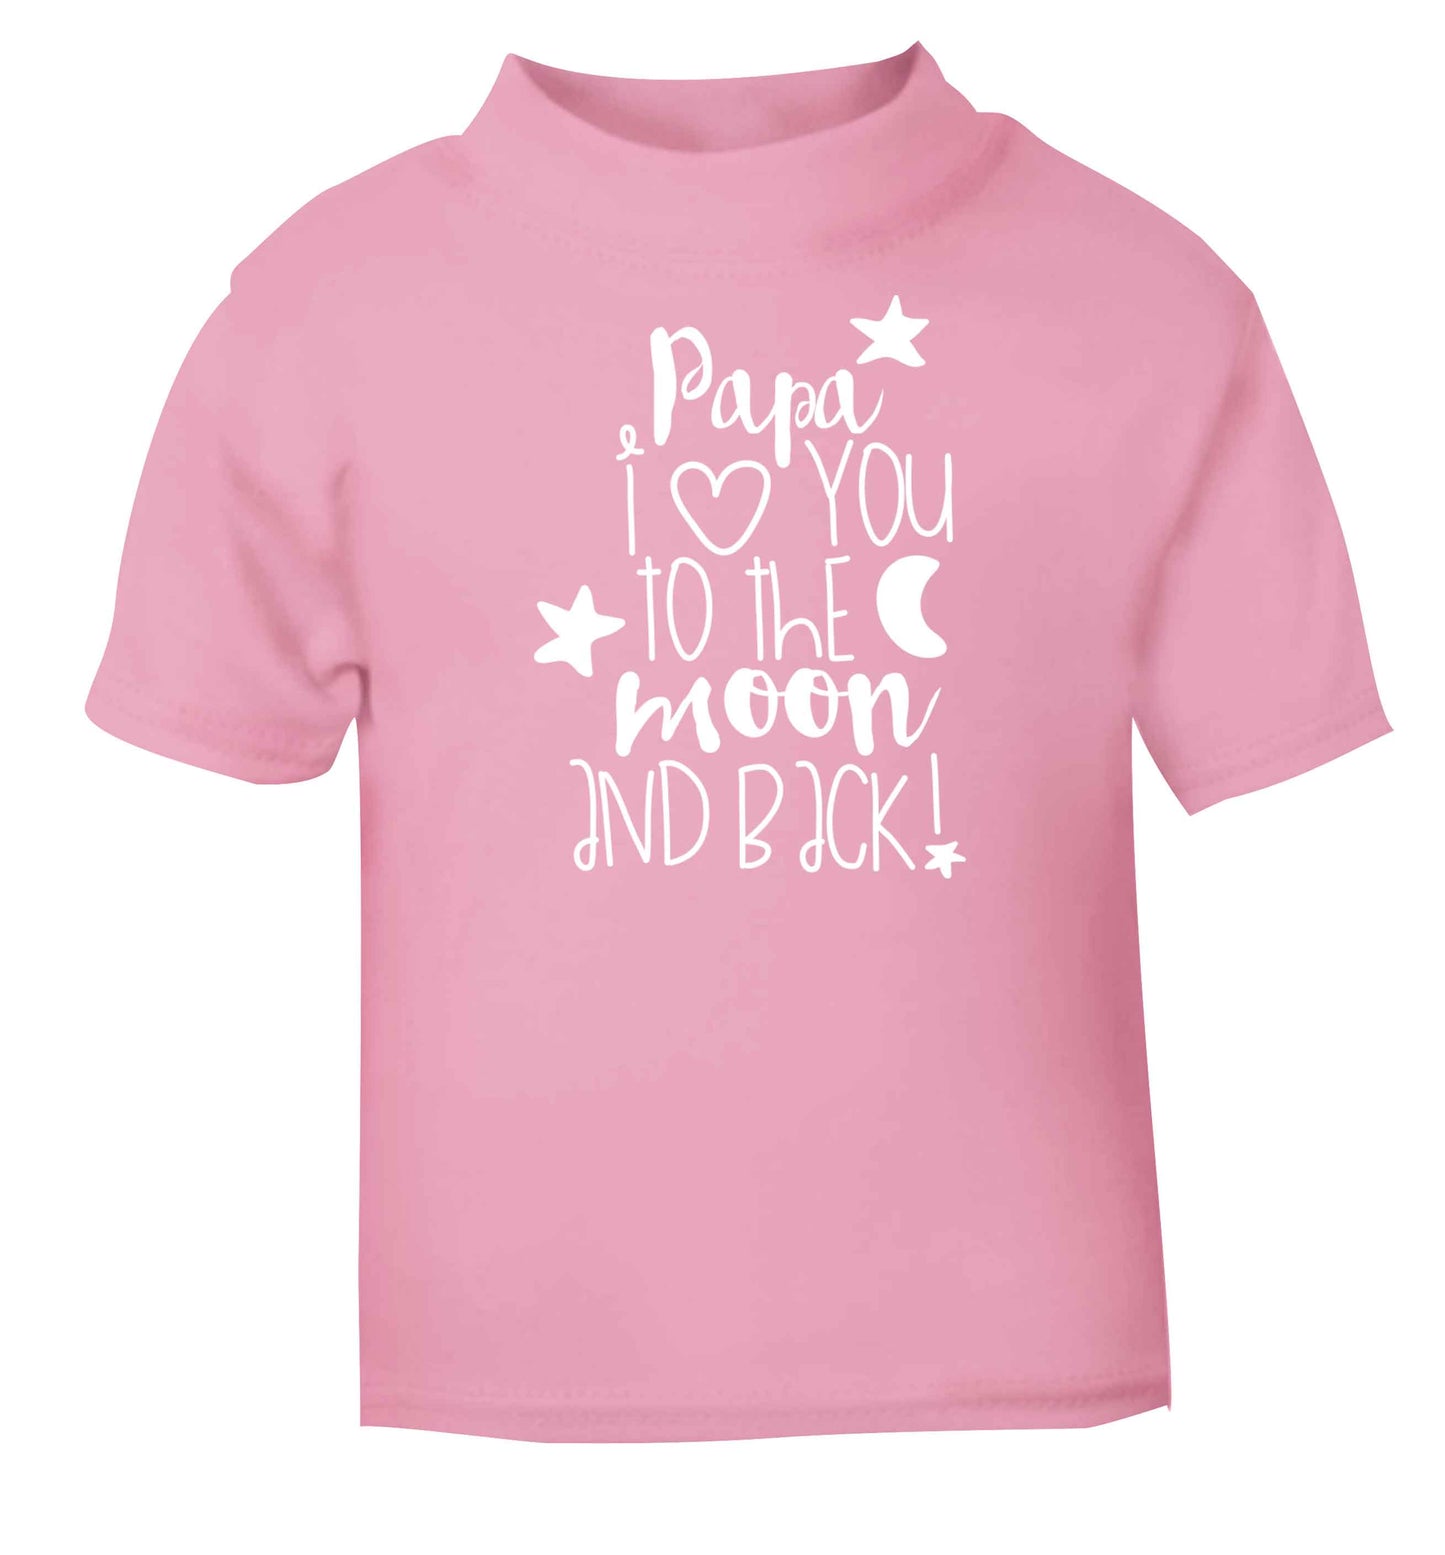 Papa I love you to the moon and back light pink baby toddler Tshirt 2 Years